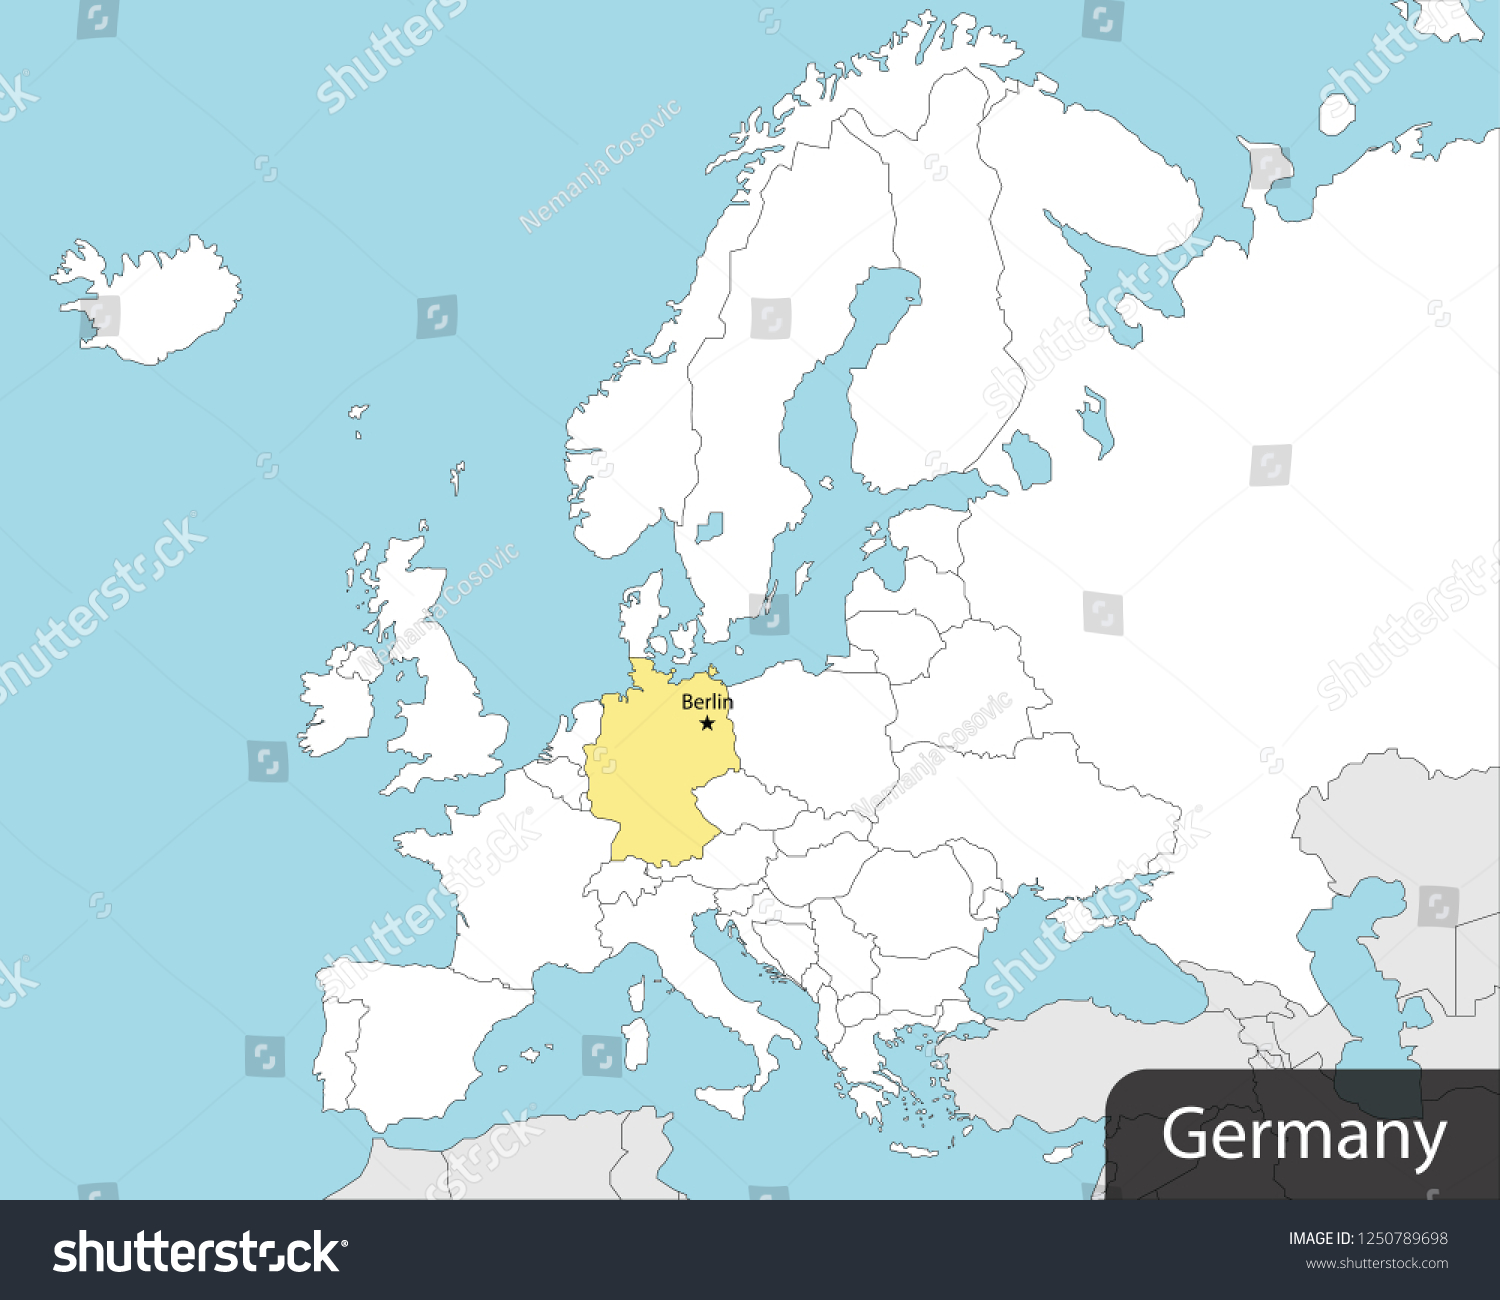 SVG of europe map, germany, capital berlin  svg